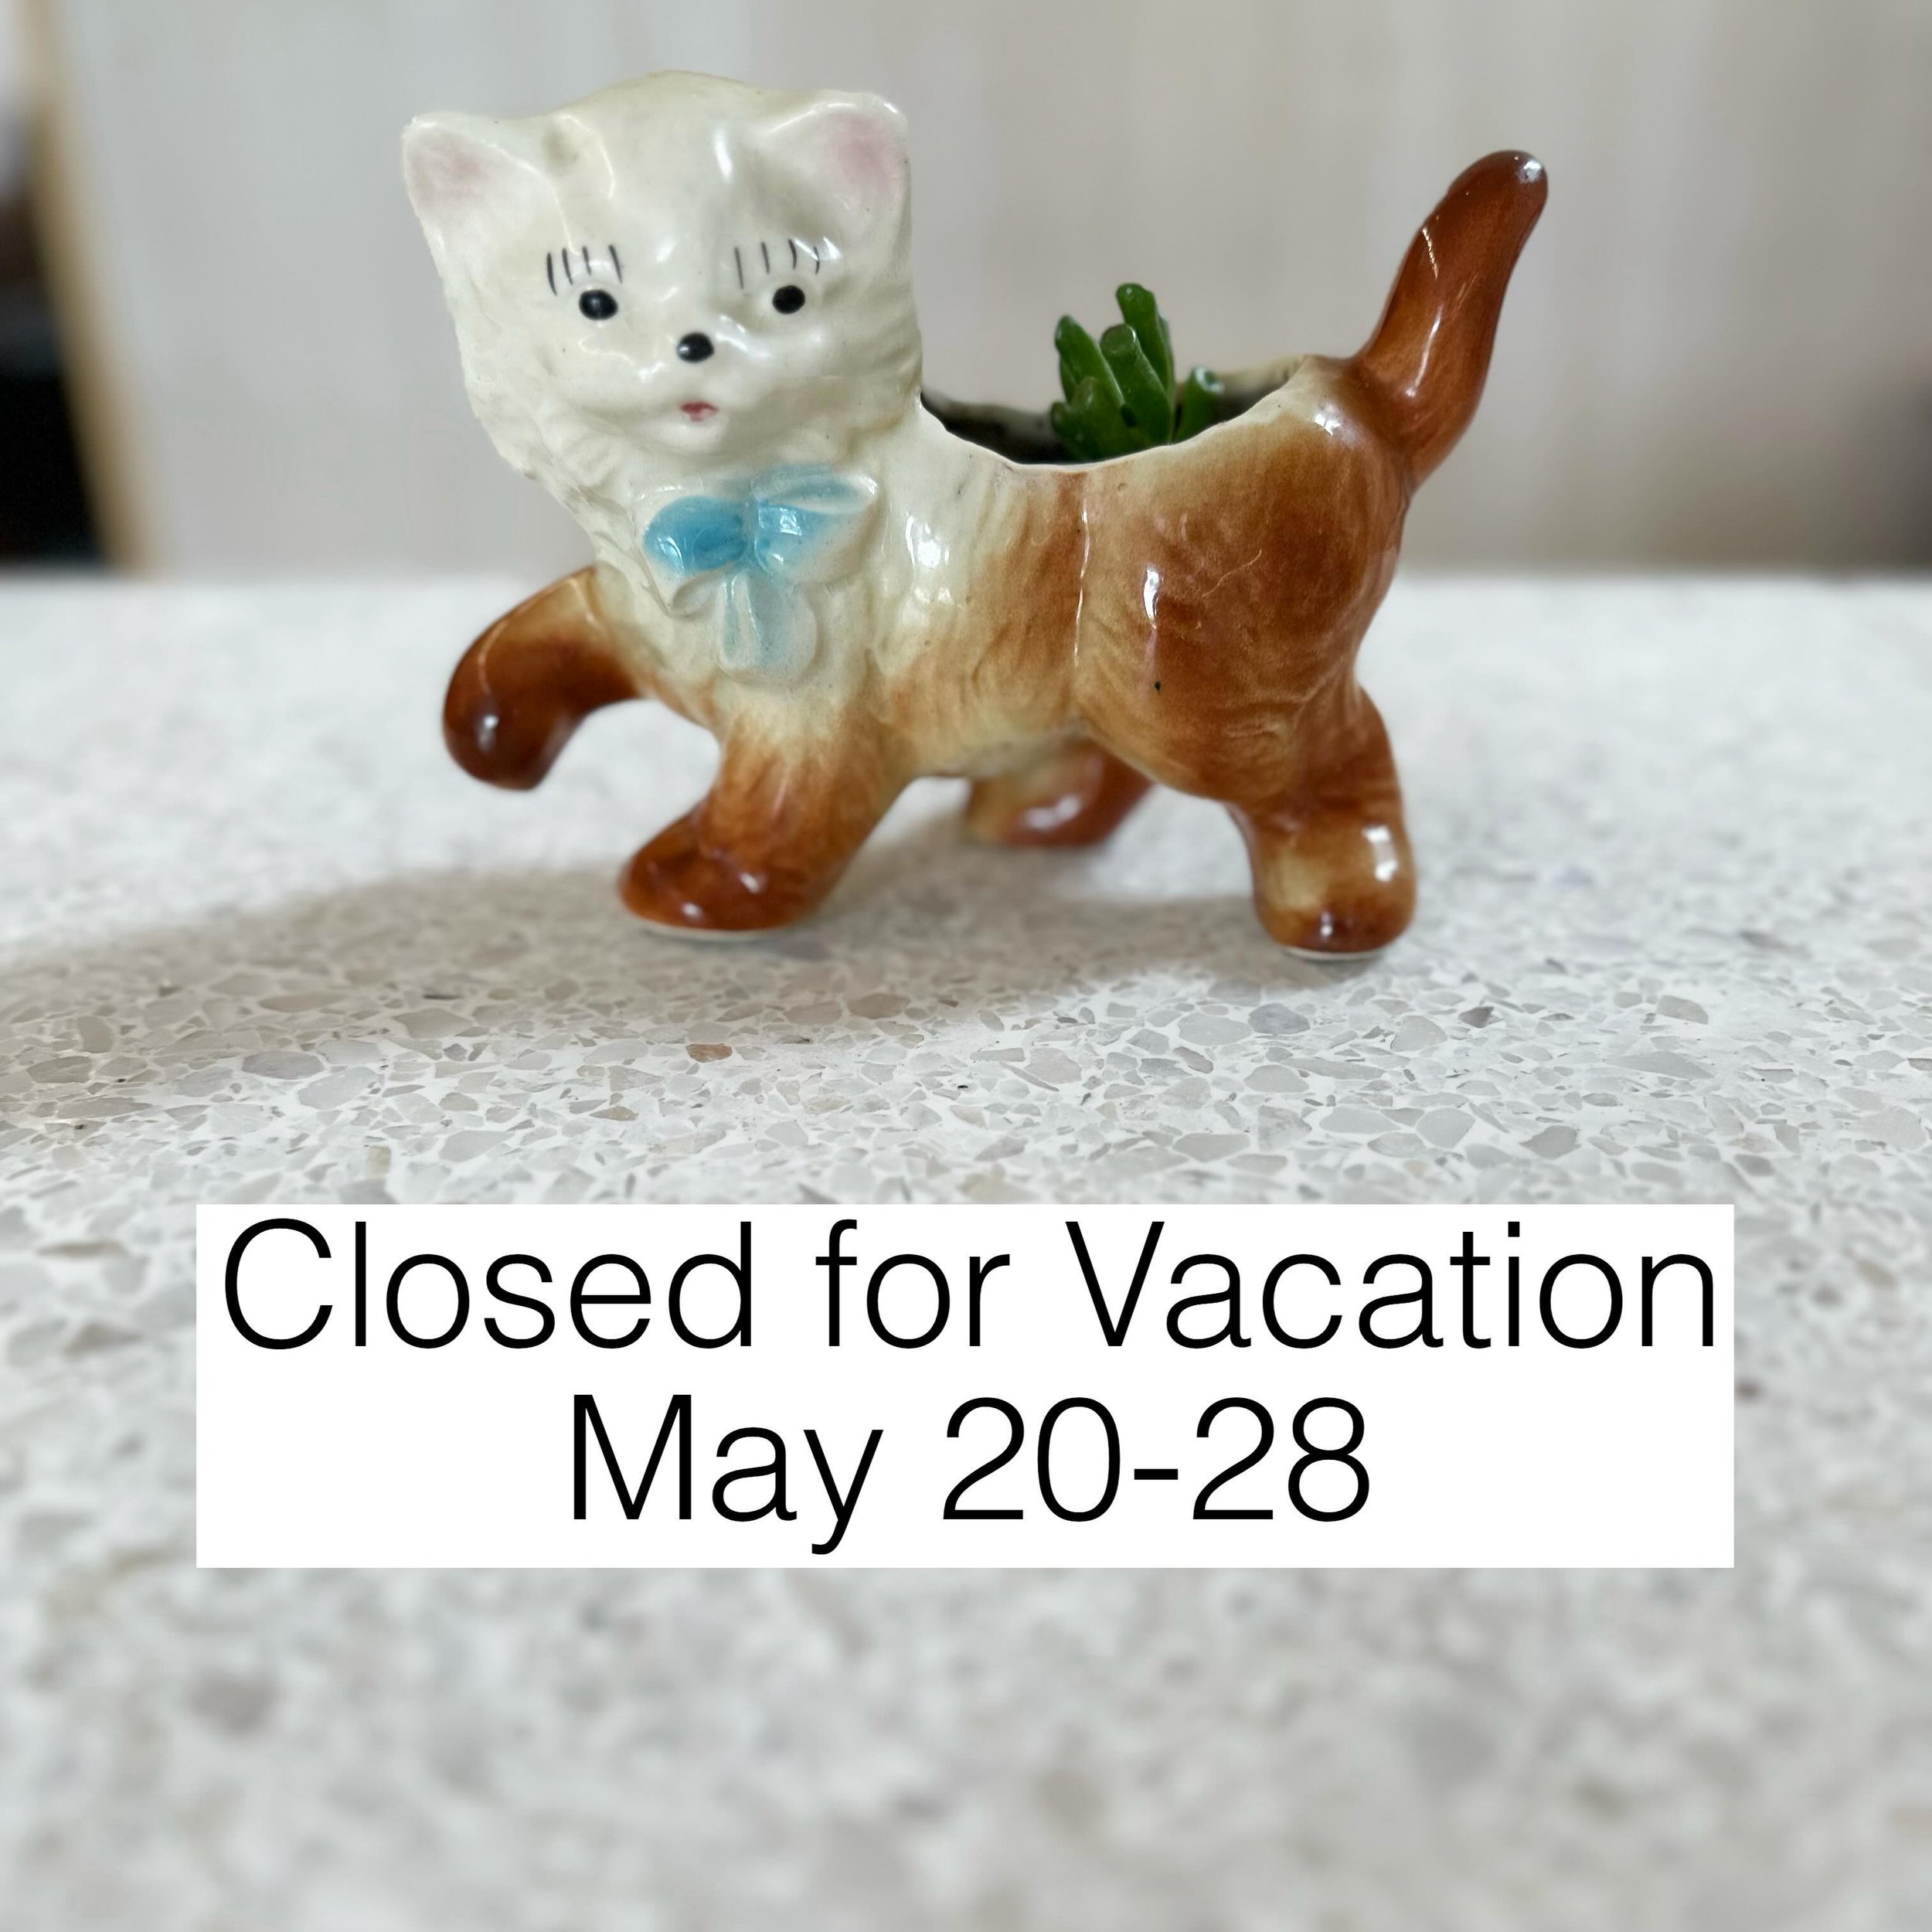 A heads-up that we will be closed all week for a little break! See you on the 29th! 😻😻 #buckminsterscatcafe #adoptdontshop #vacation